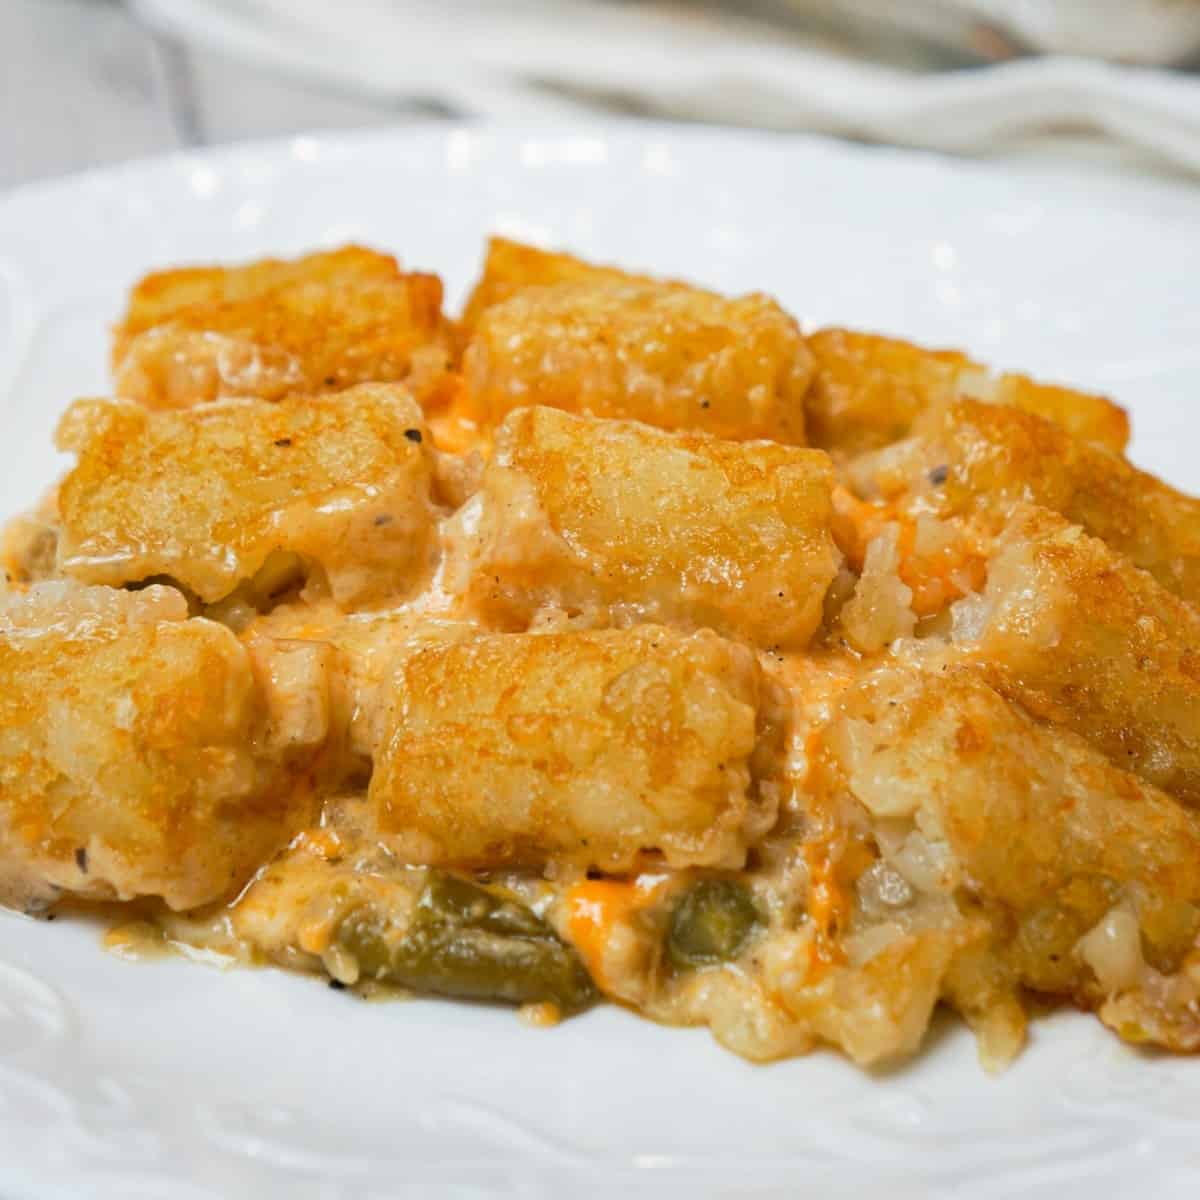 Green Bean Casserole with Tater Tots is an easy side dish recipe made with canned green beans and loaded with cream of mushroom soup, French's fried onions, shredded cheese and tater tots.